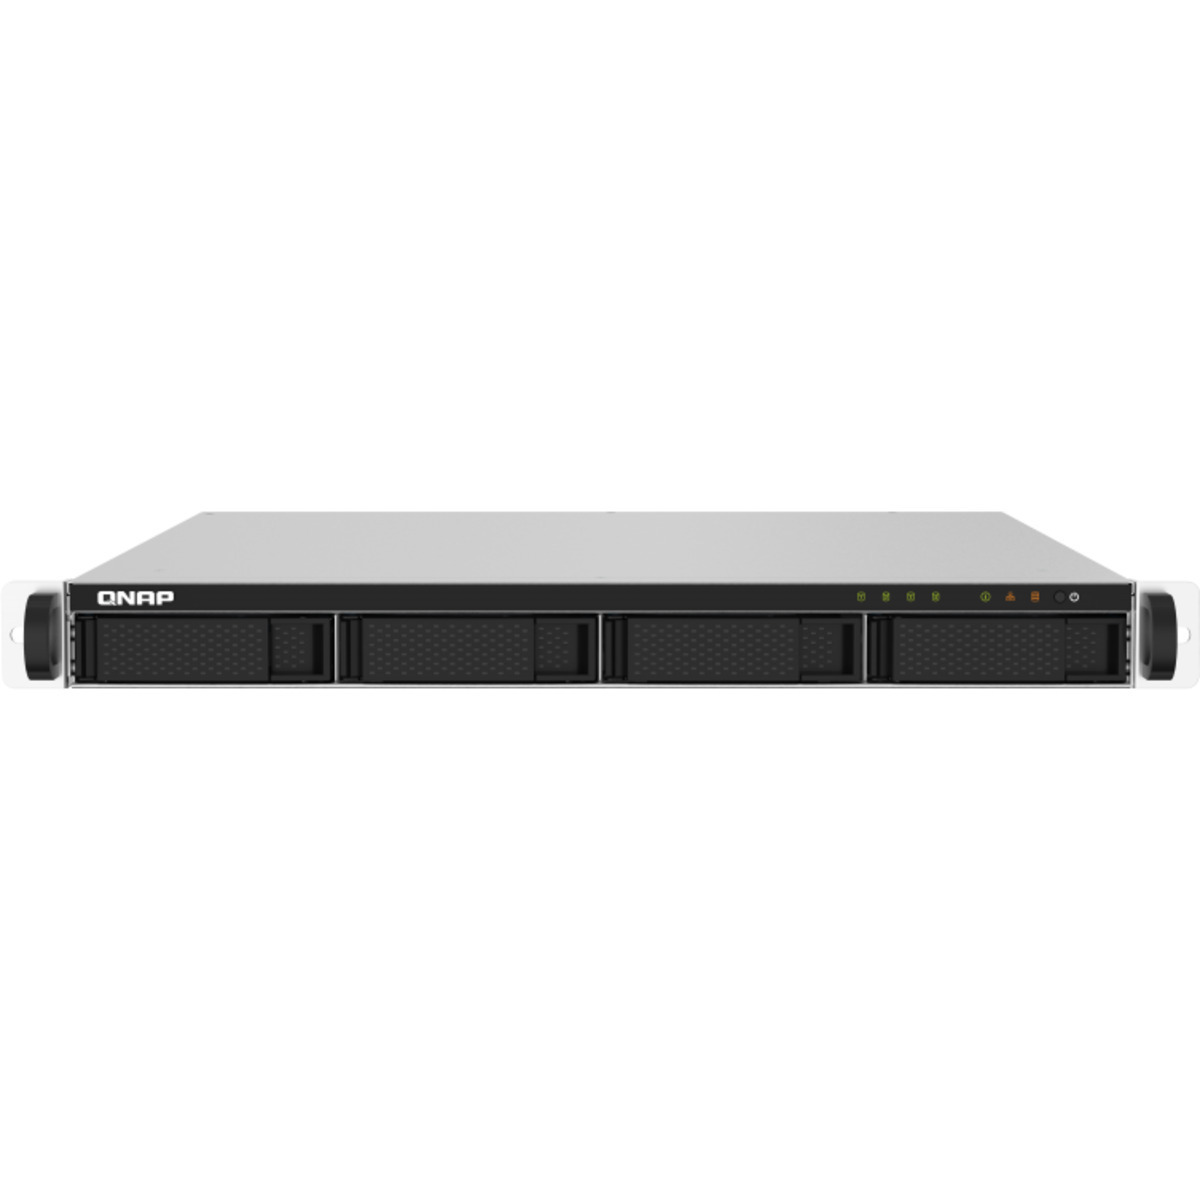 buy $1820 QNAP TS-432PXU 64tb RackMount NAS - Network Attached Storage Device 4x16000gb Seagate EXOS X18 ST16000NM000J 3.5 7200rpm SATA 6Gb/s HDD ENTERPRISE Class Drives Installed - Burn-In Tested - FREE RAM UPGRADE - nas headquarters buy network attached storage server device das new raid-5 free shipping simply usa TS-432PXU